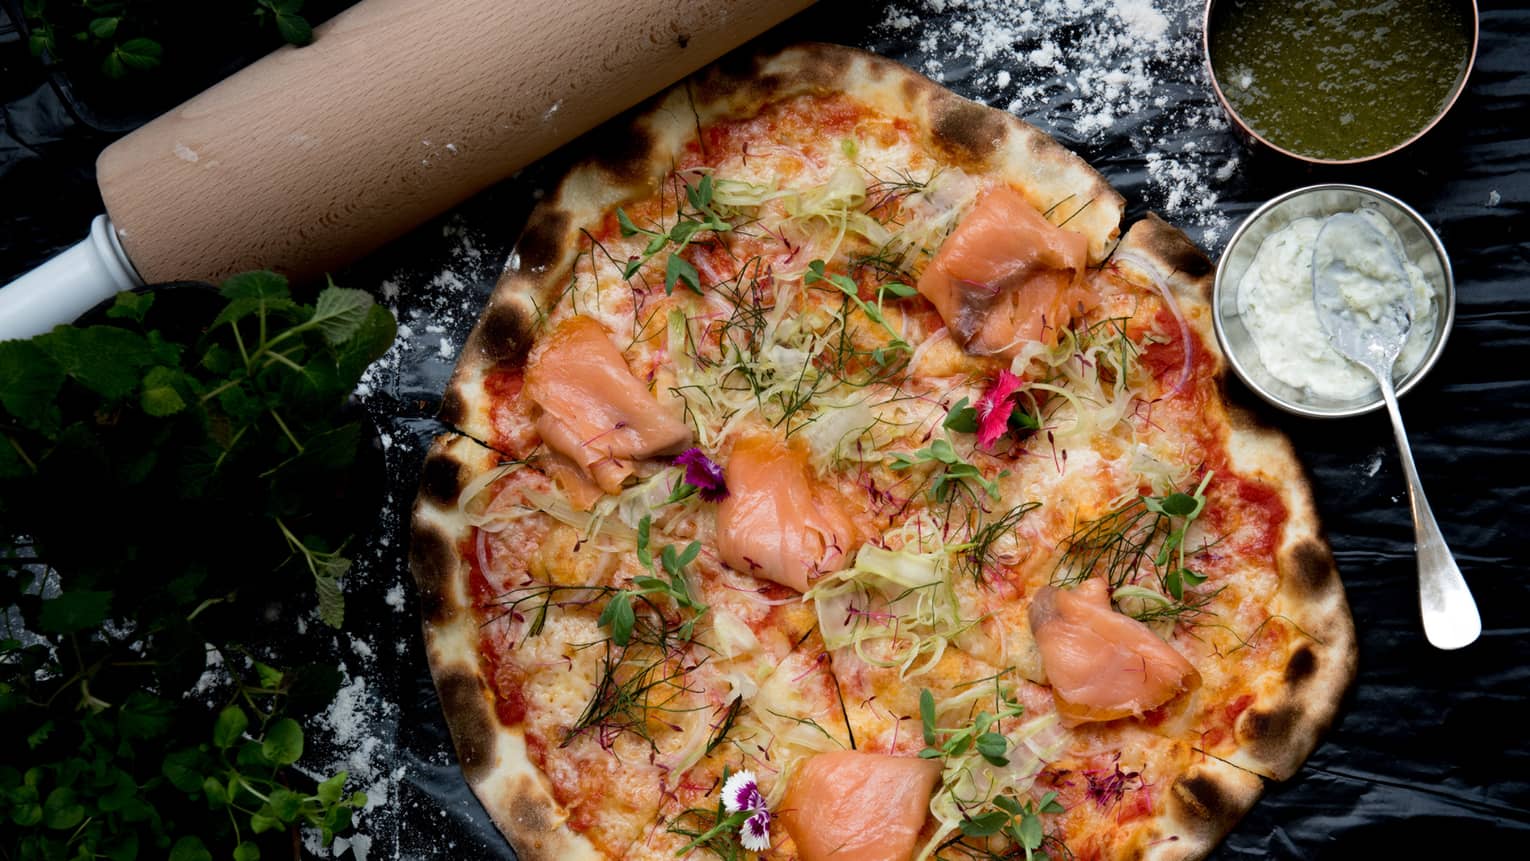 A wood-fired pizza topped with smoked salmon, fennel and dill, bowls of green and white sauces on the side. 